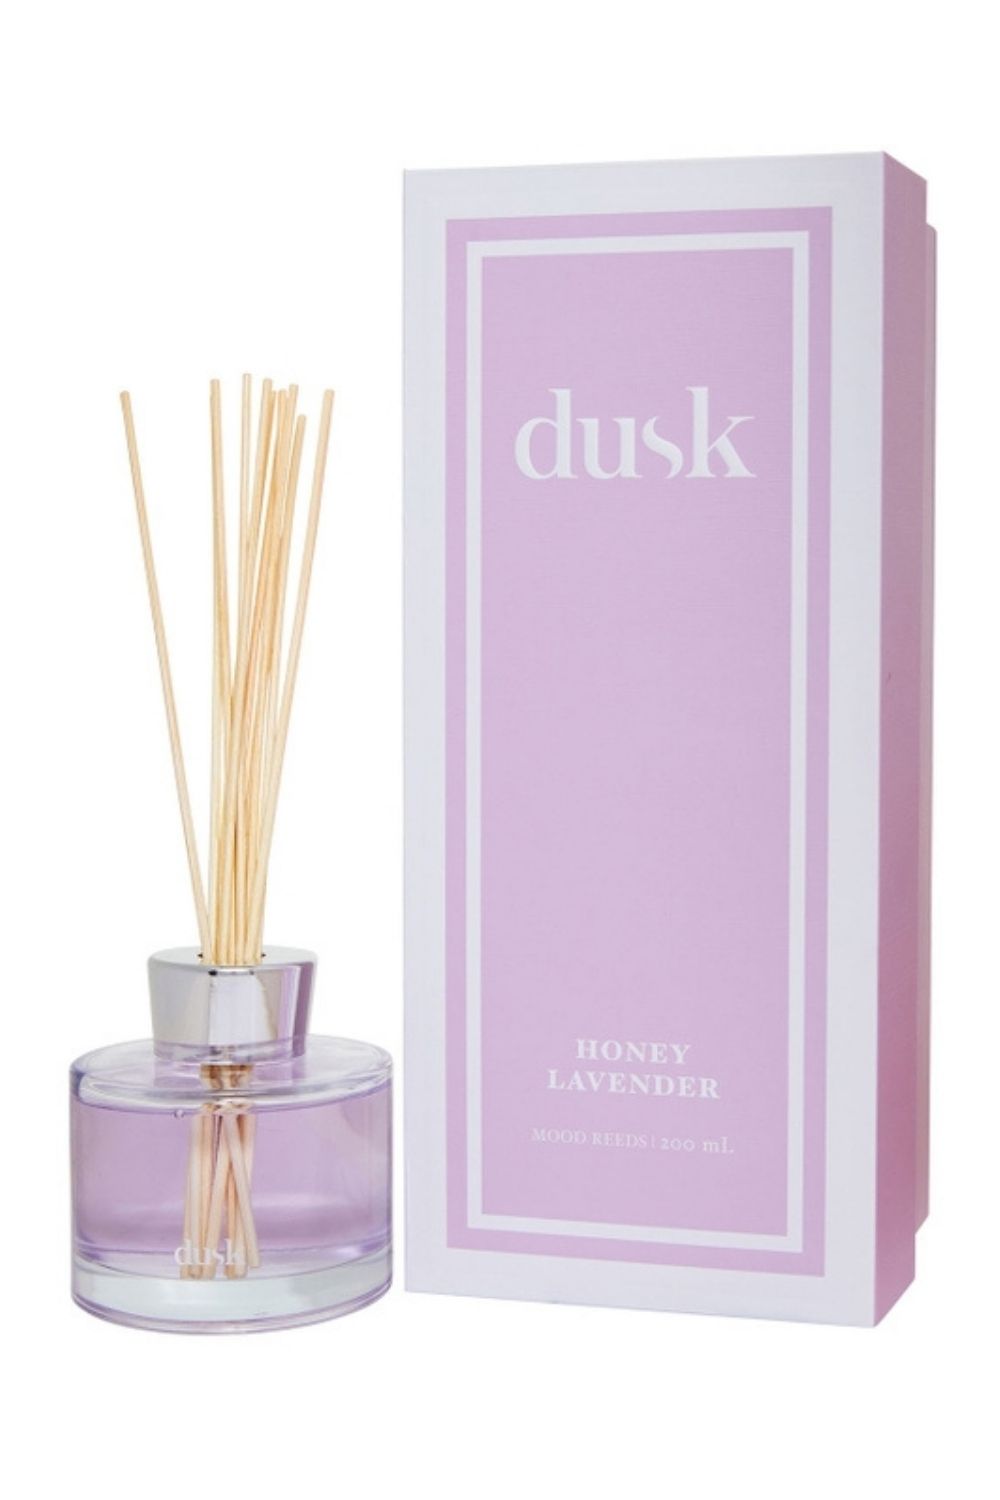 dusk-reed-diffuser